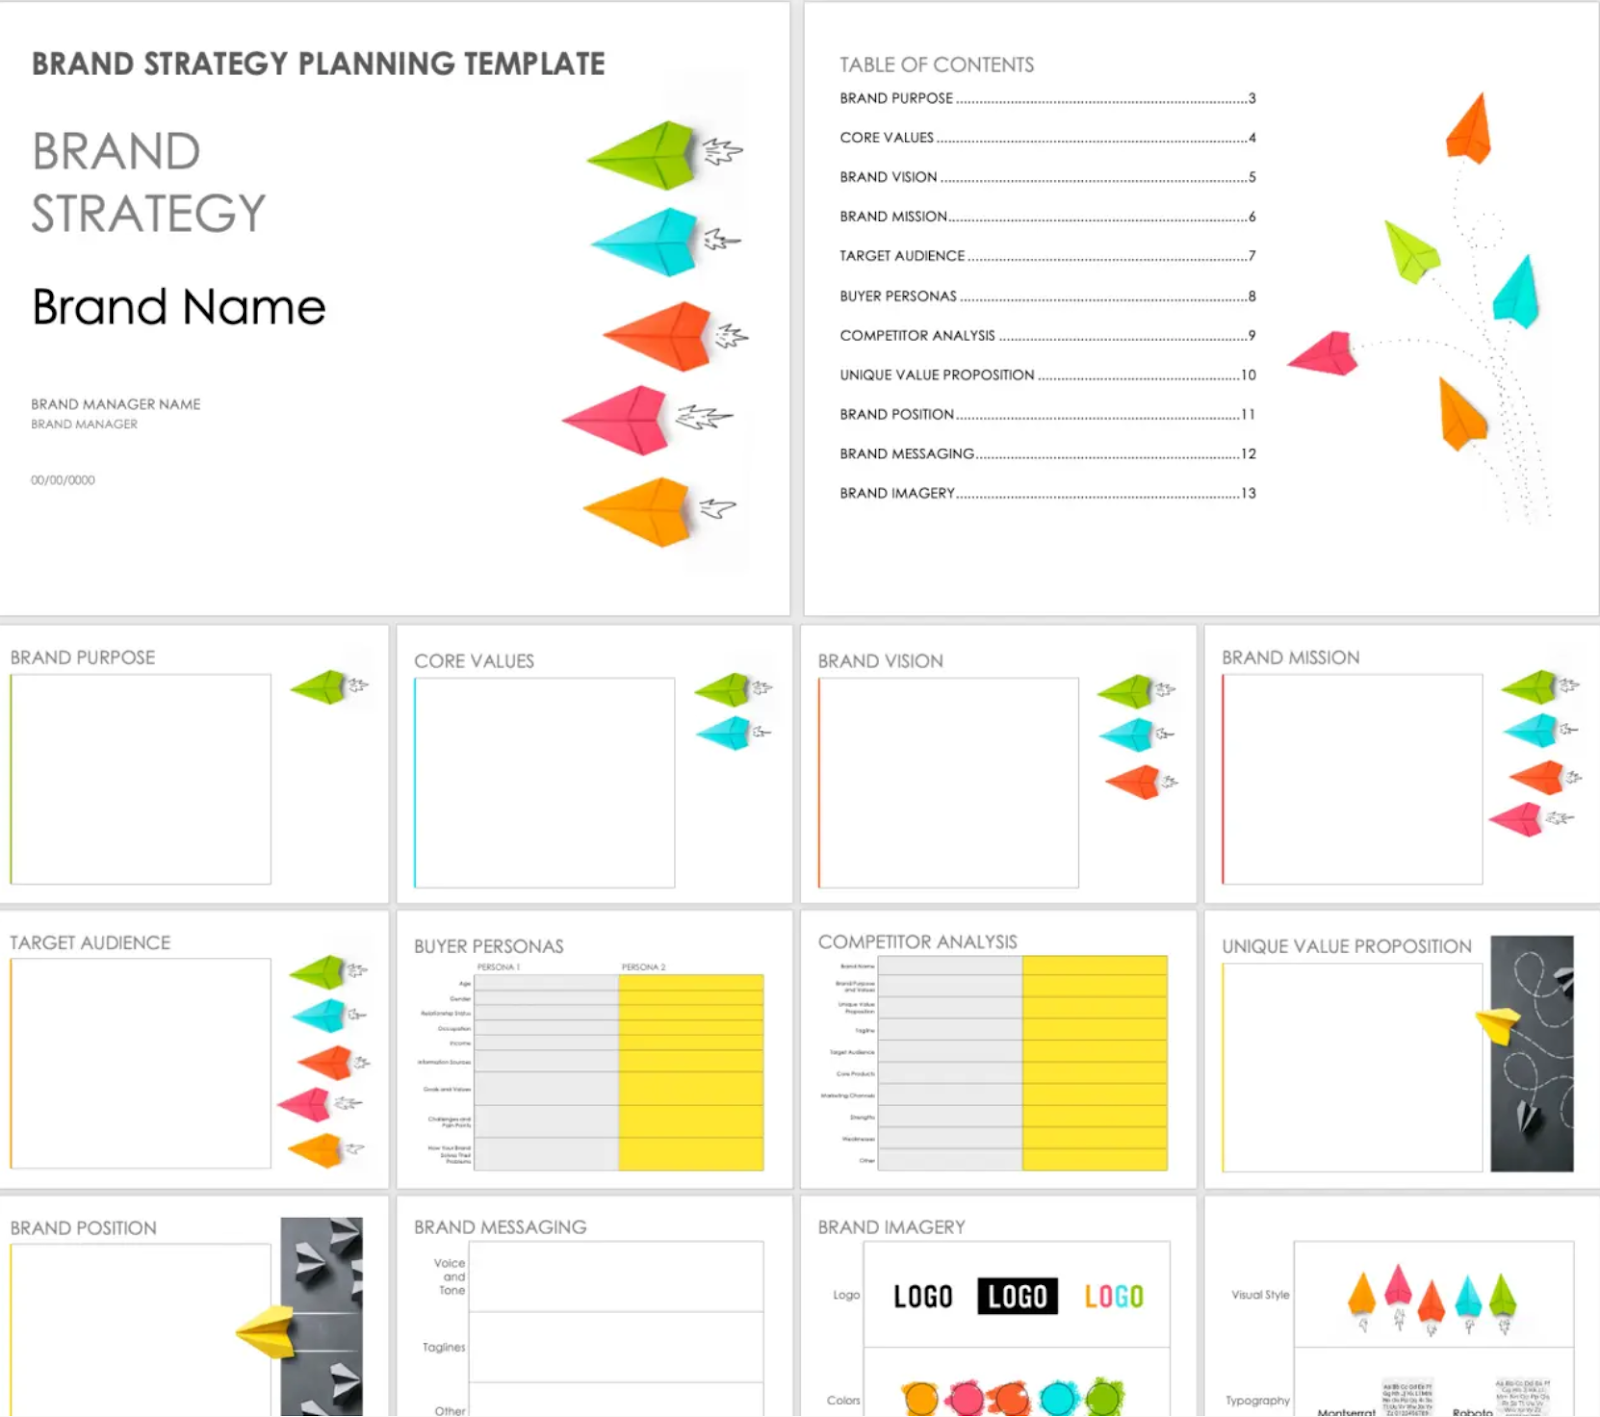 Brand strategy template